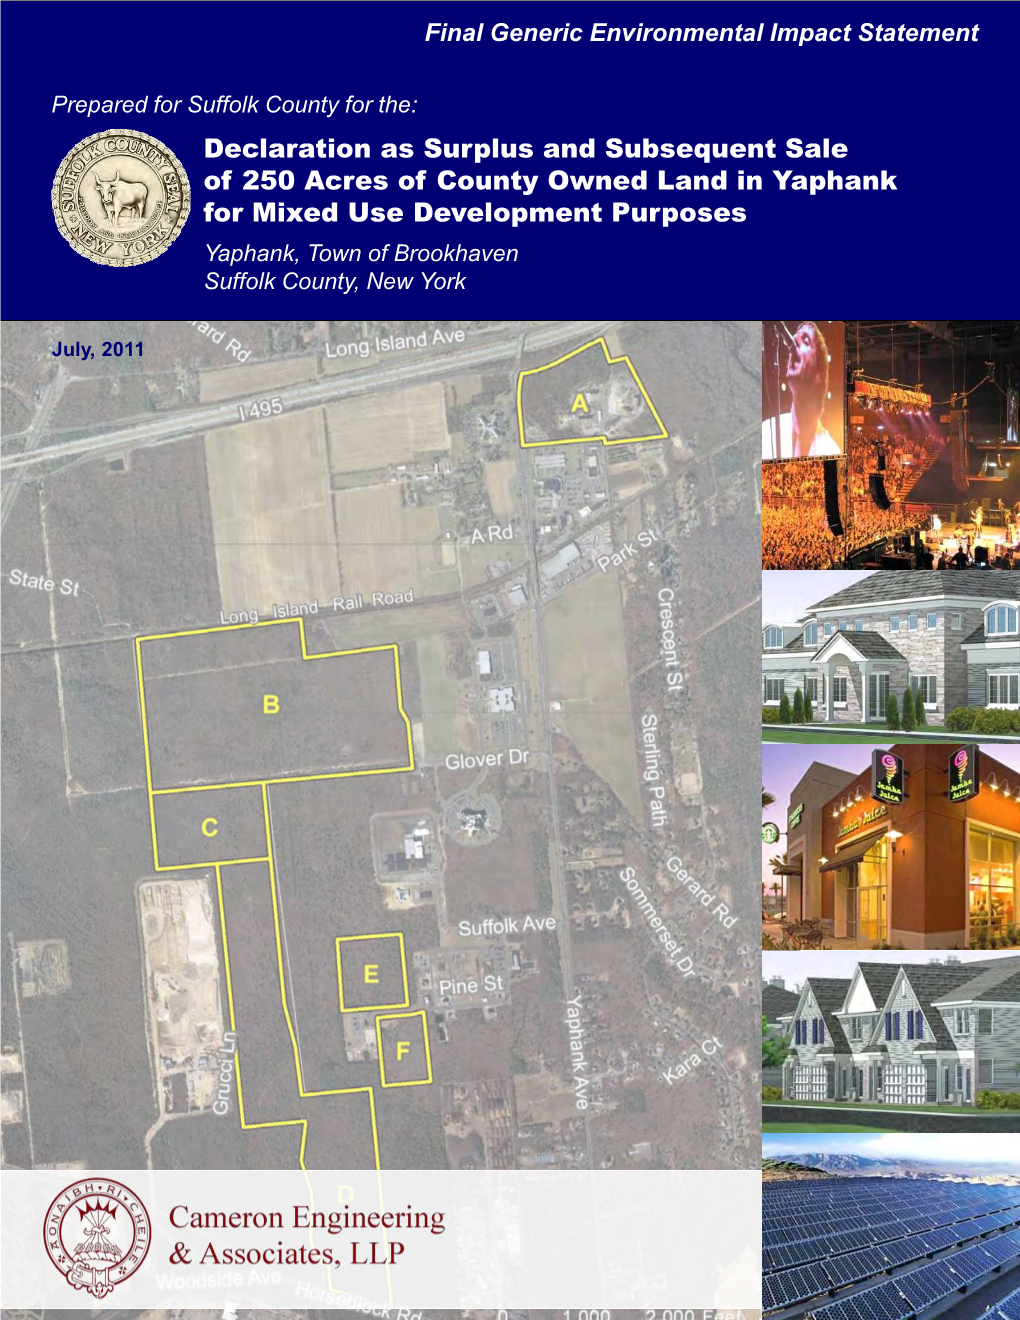 Declaration As Surplus and Subsequent Sale of 250 Acres of County Owned Land in Yaphank for Mixed Use Development Purposes